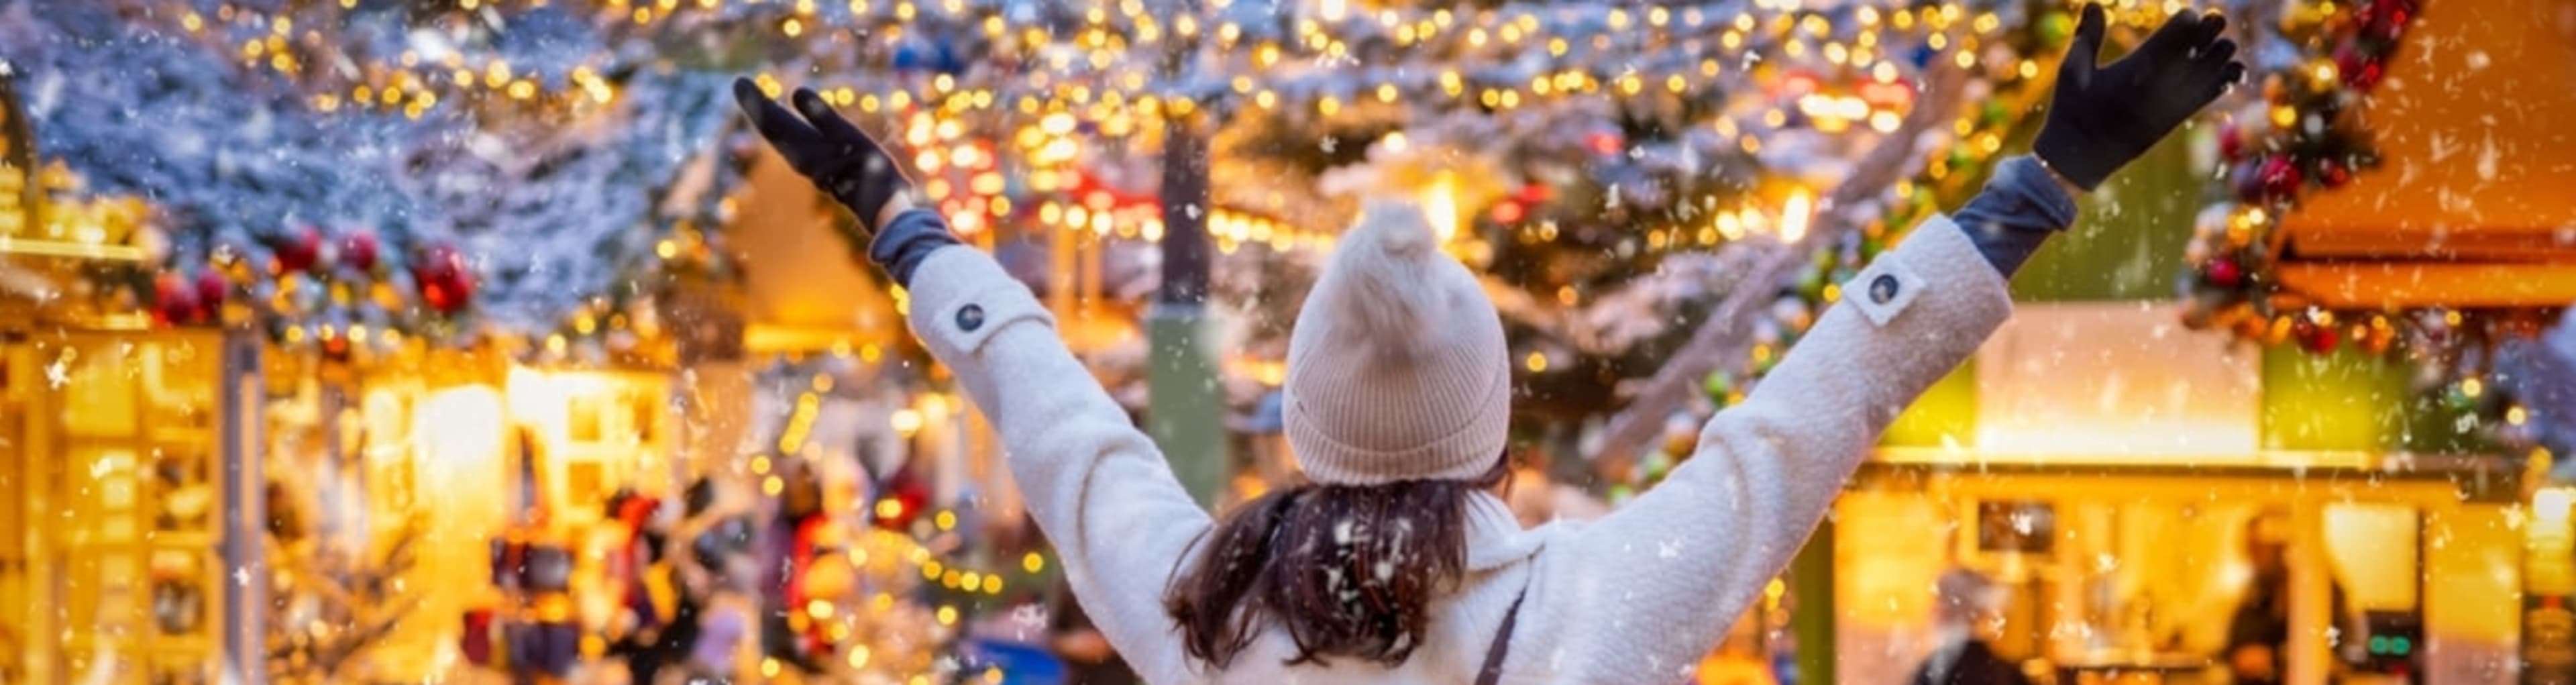 Woman raising her arms in joy at a Christmas market.